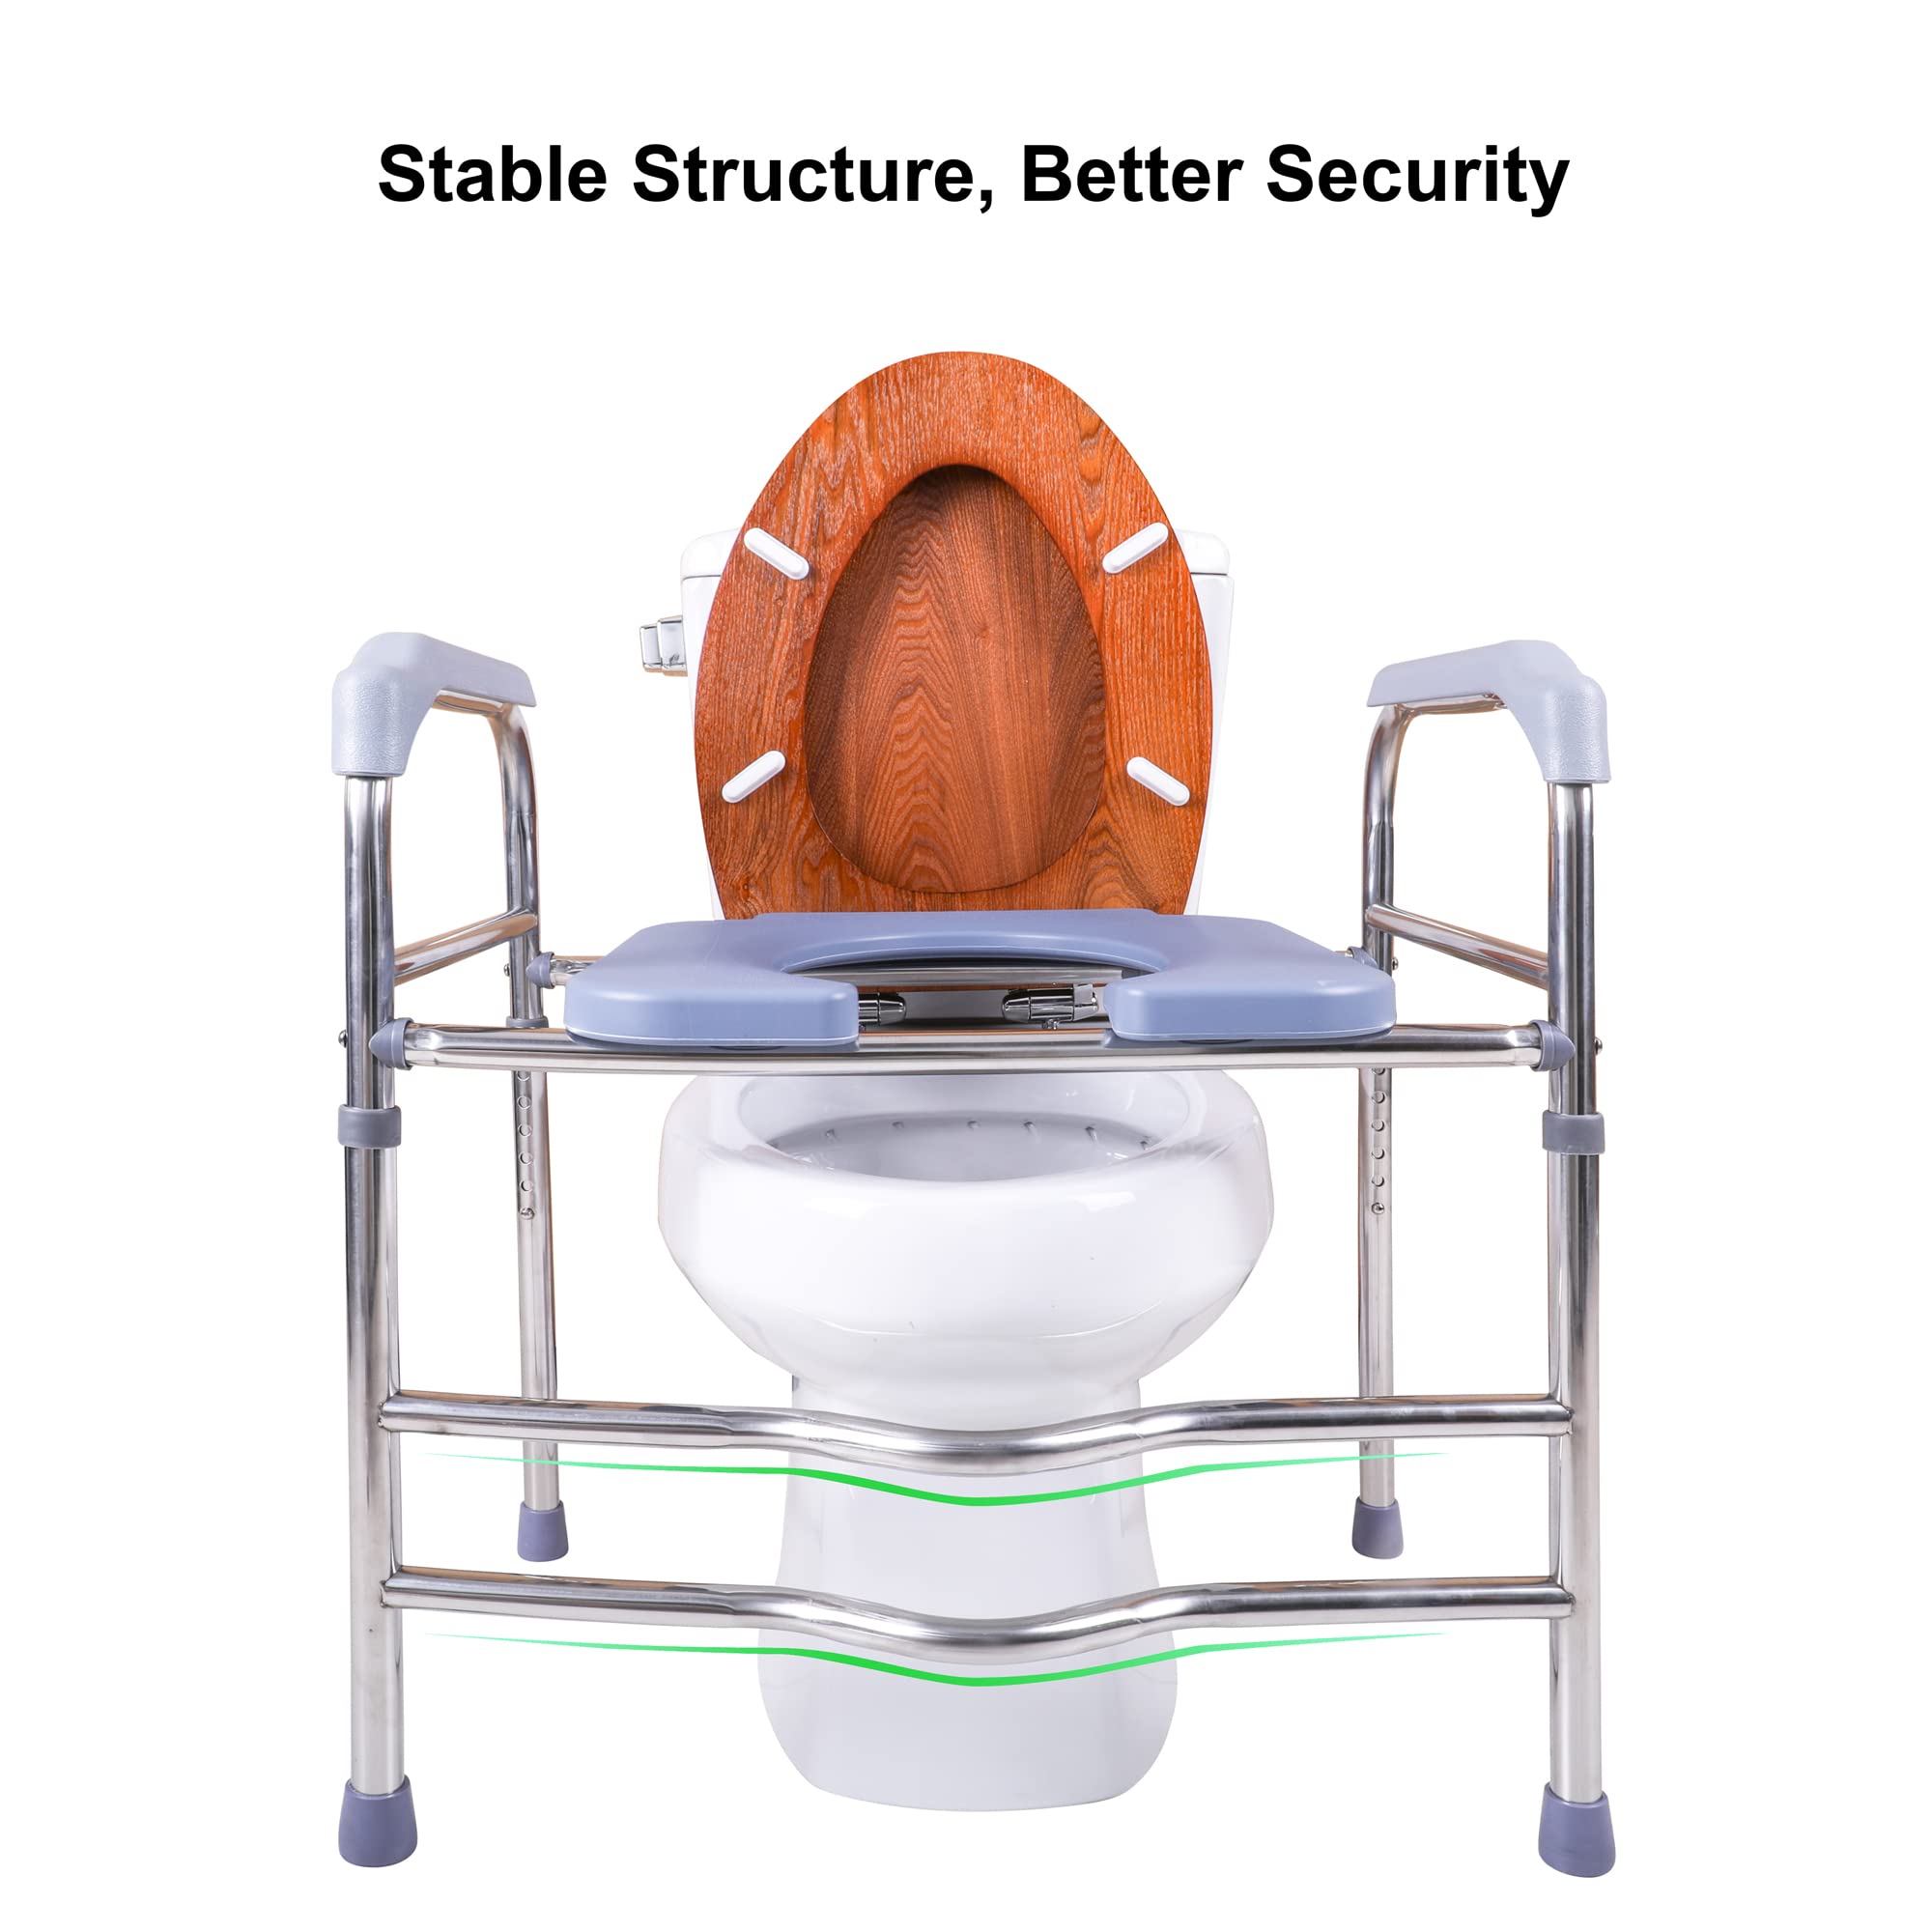 Deewow Raised Toilet Seat with Handles 400lbs, Elevated Toilet Seat Riser Bathroom Stand Alone Toilet Safety Frame for Elderly, Pregnant and Handicap, Adjustable Height, Fit Any Toilet